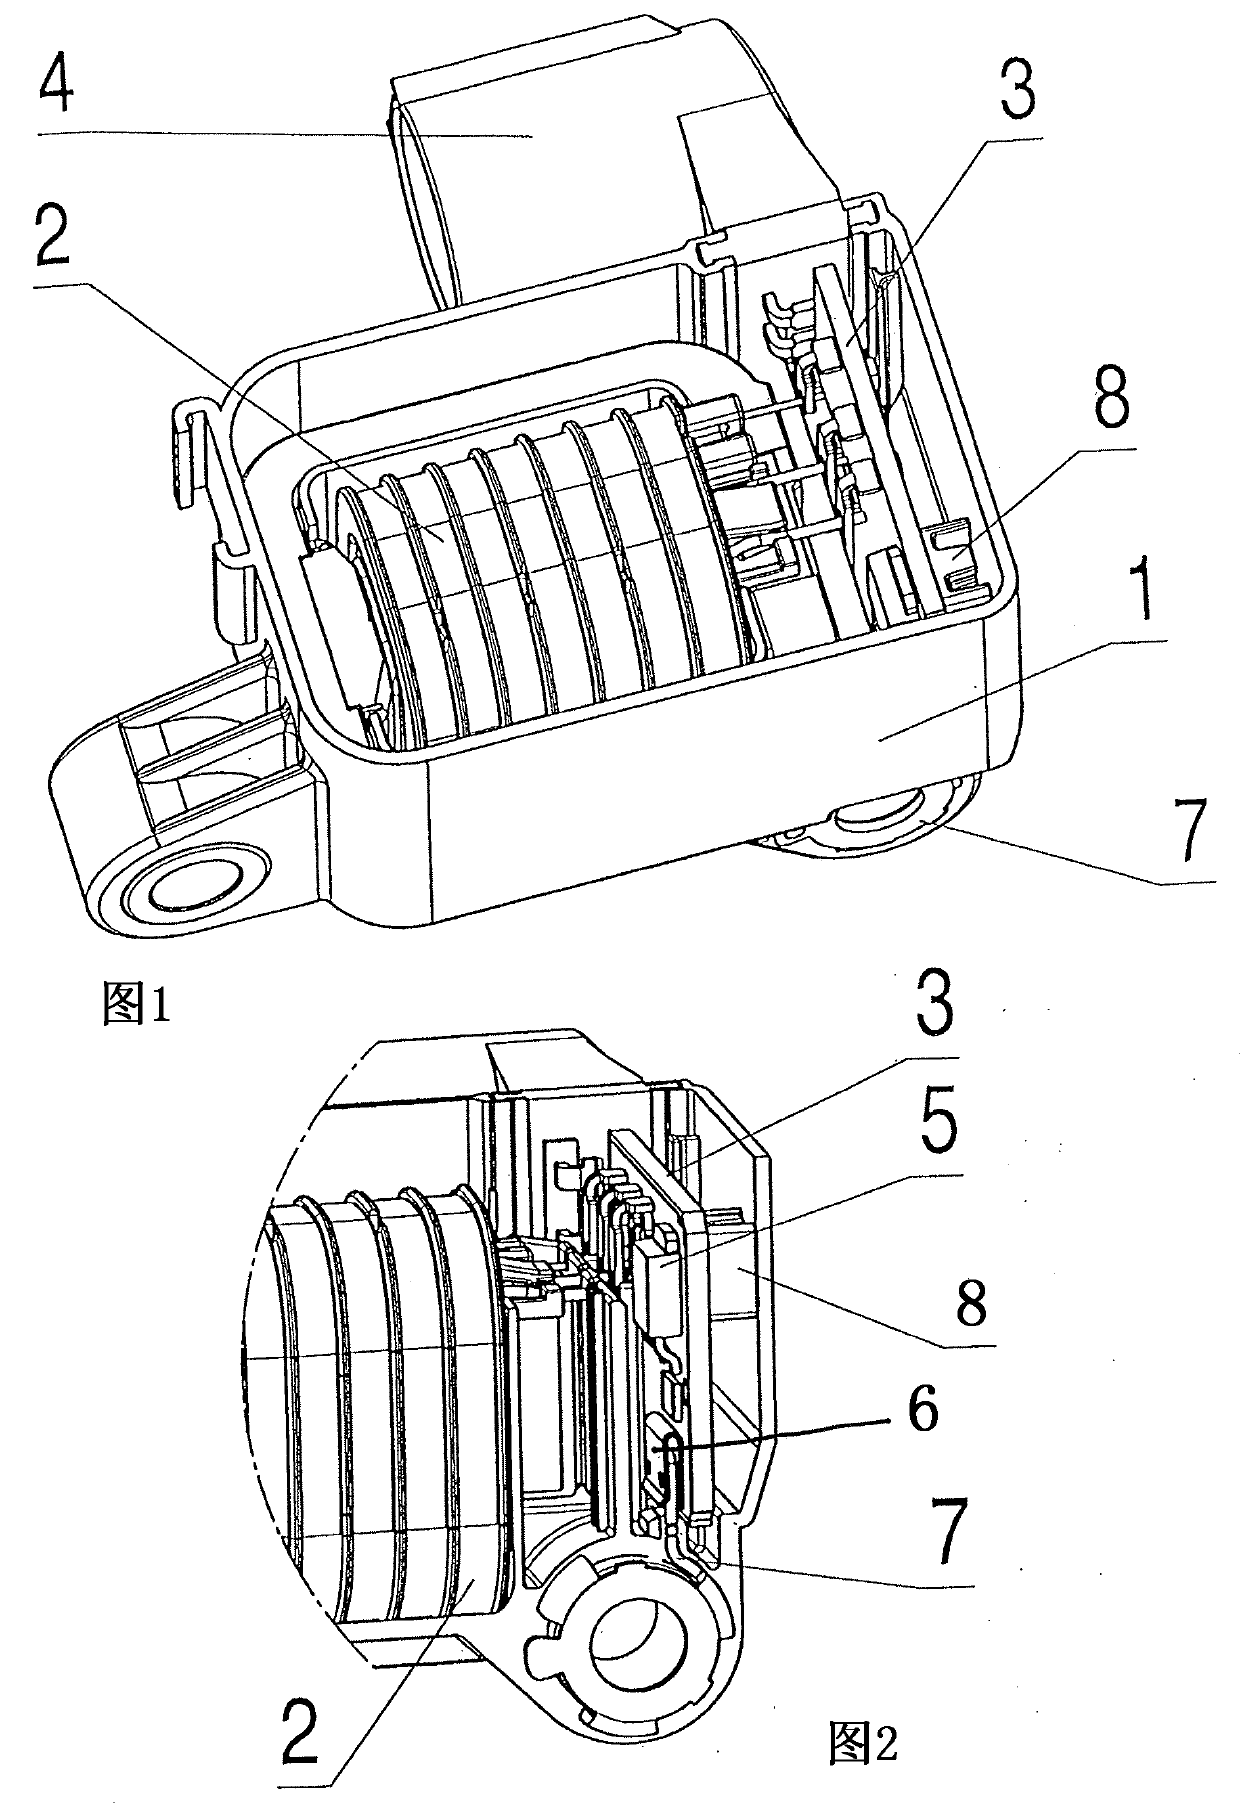 Ignition device for spark ignition engines